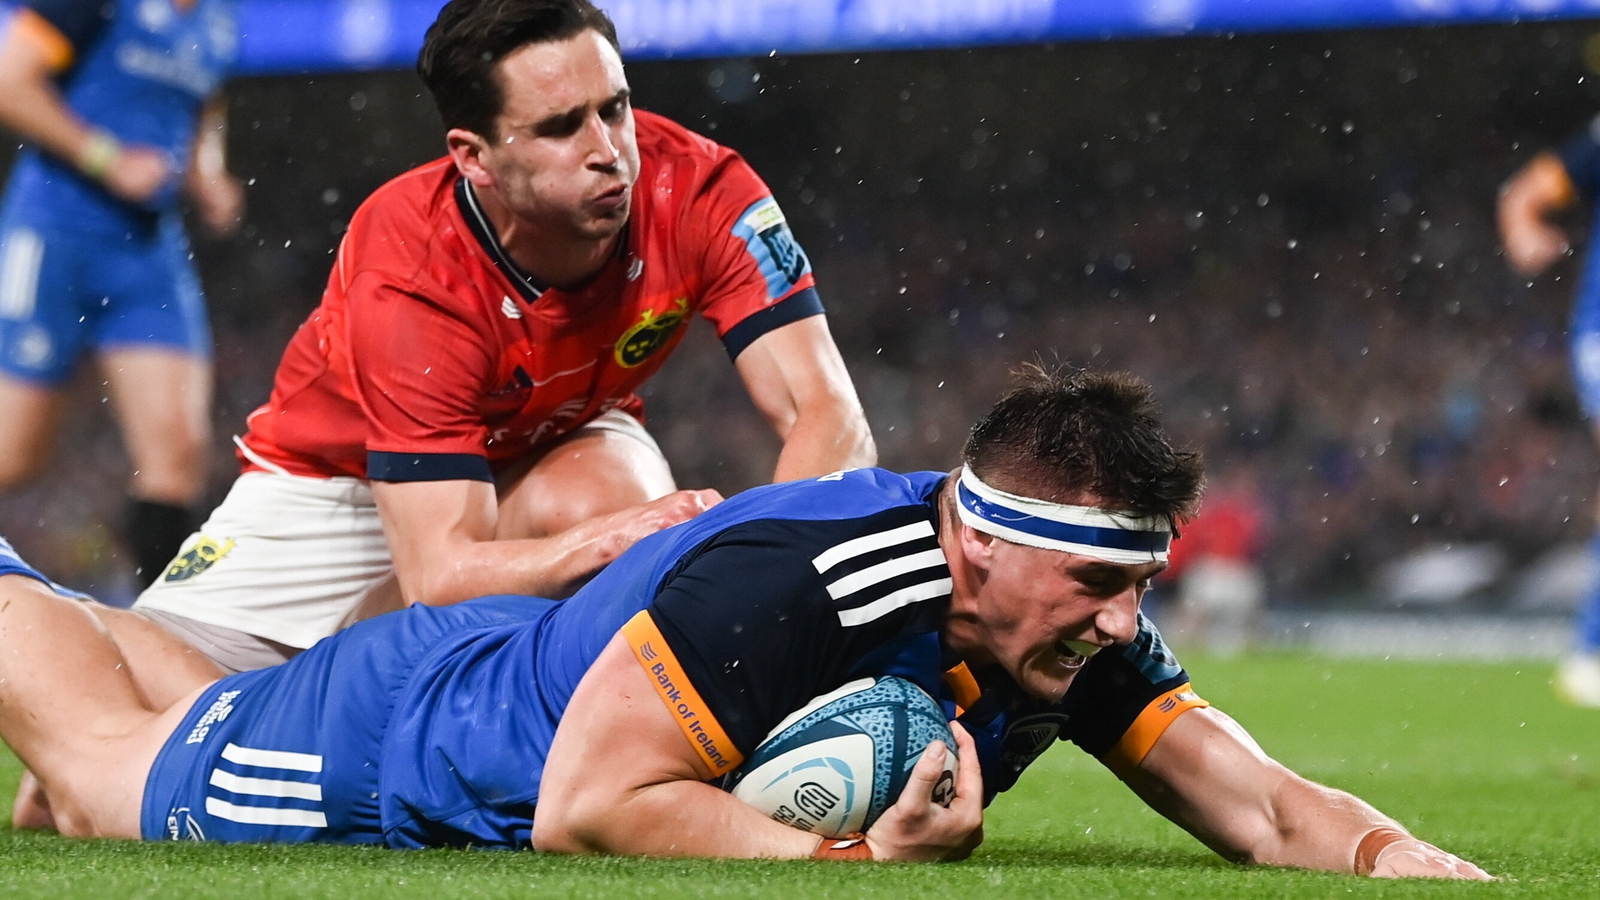 United Rugby Championship Leinster 27-13 Munster recap